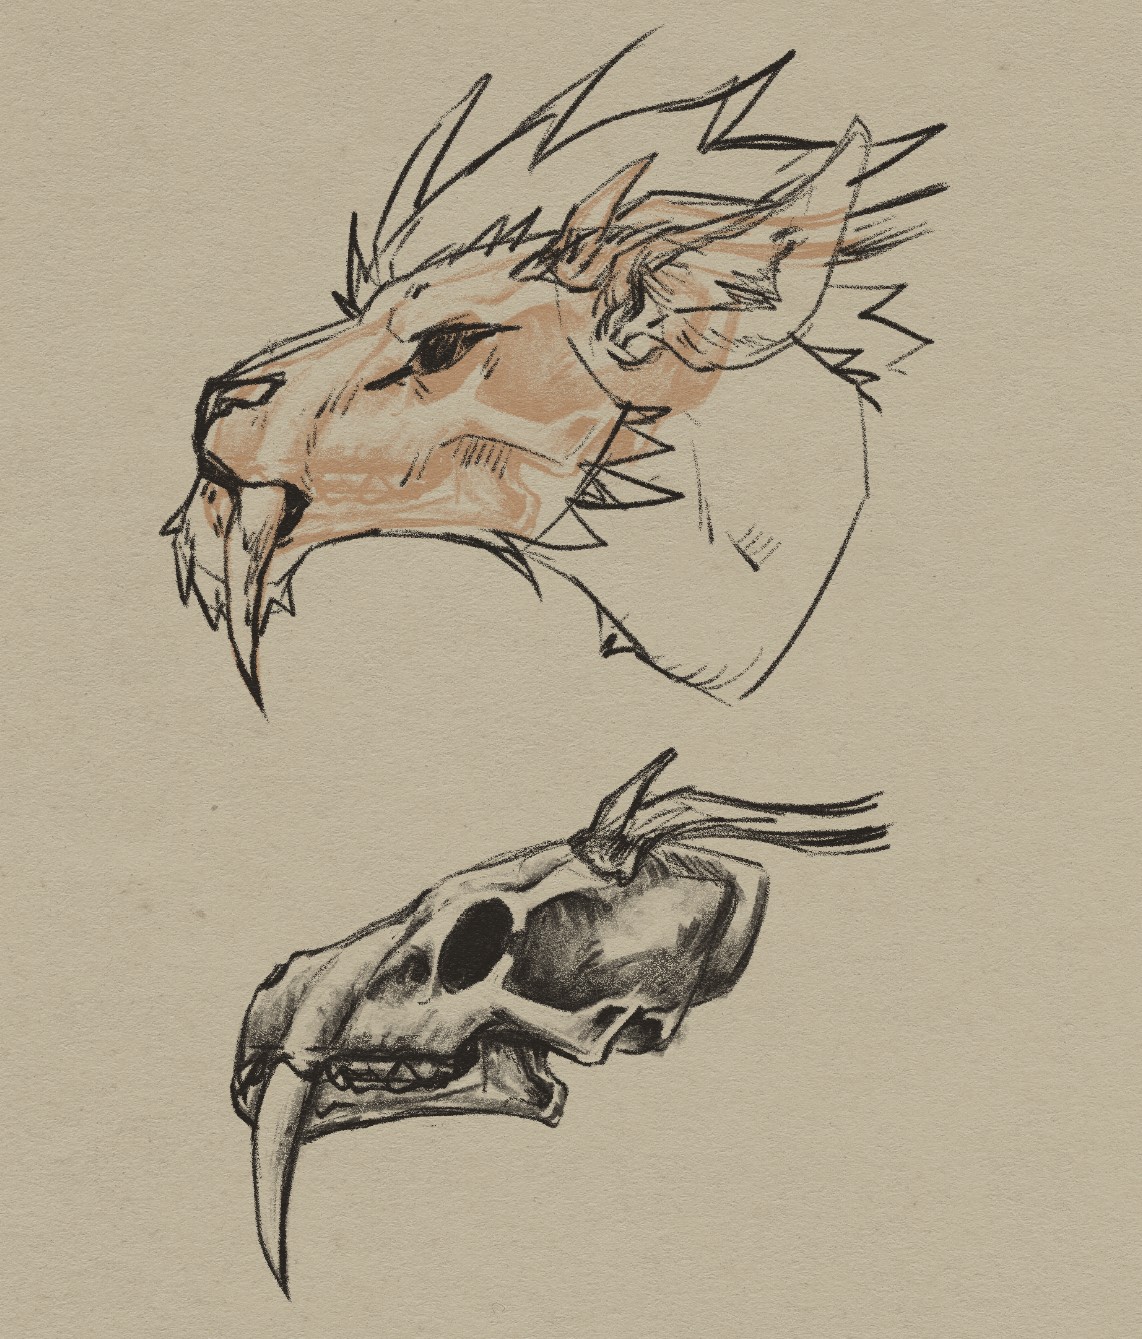 Two different sketches of the profile of a deer-dragon-like being. The top one features the head of this being with seer skull transparent to show the structure of the head with fur and flesh. The bottom sketch is of the skull itself.